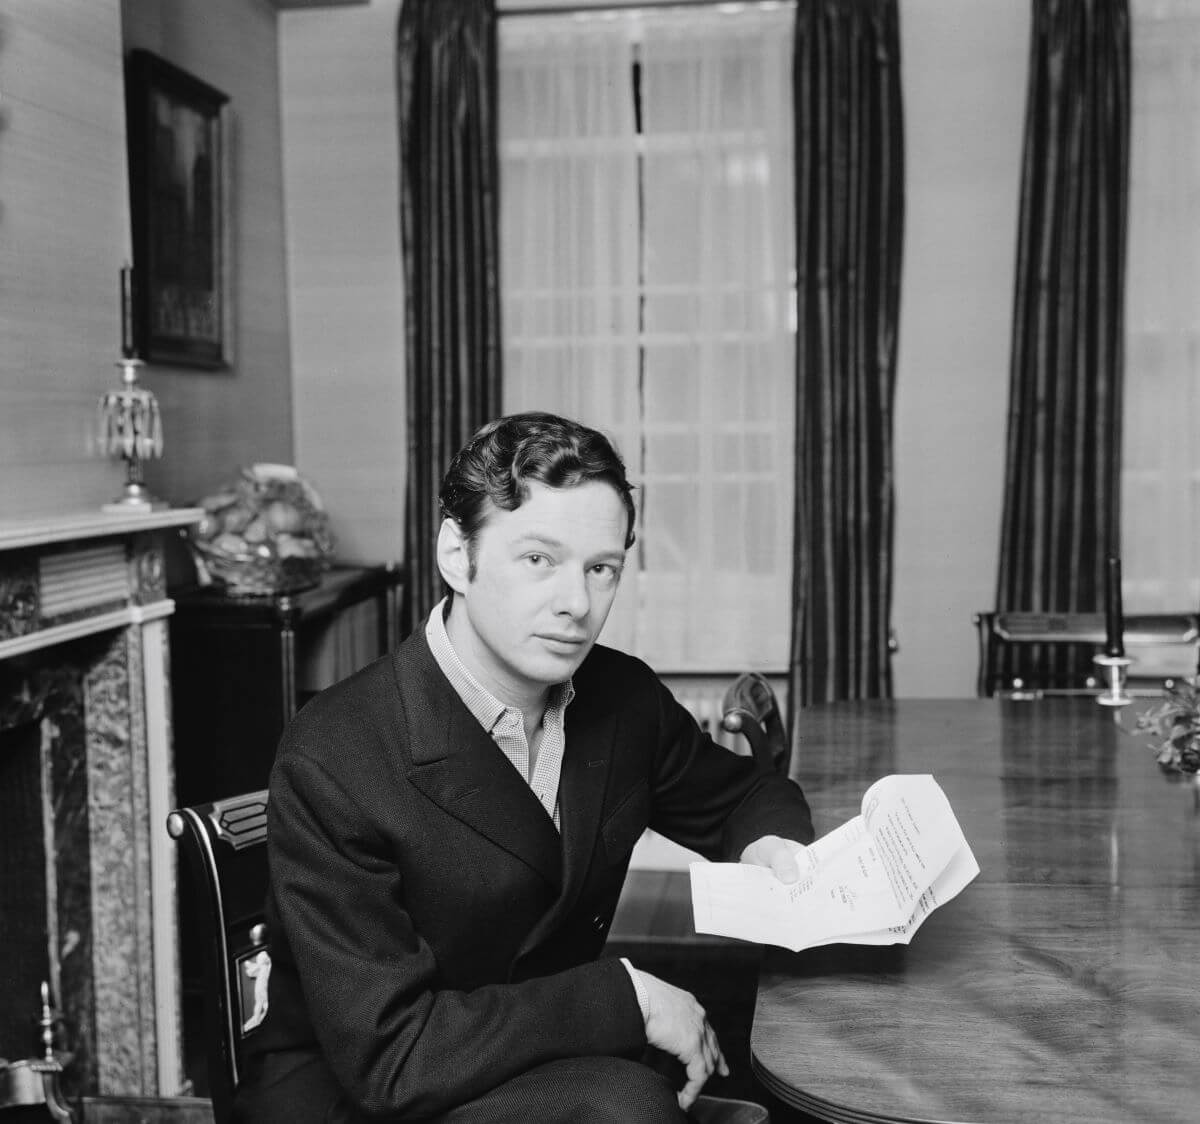 A black and white picture of Brian Epstein sitting at a table holding papers.